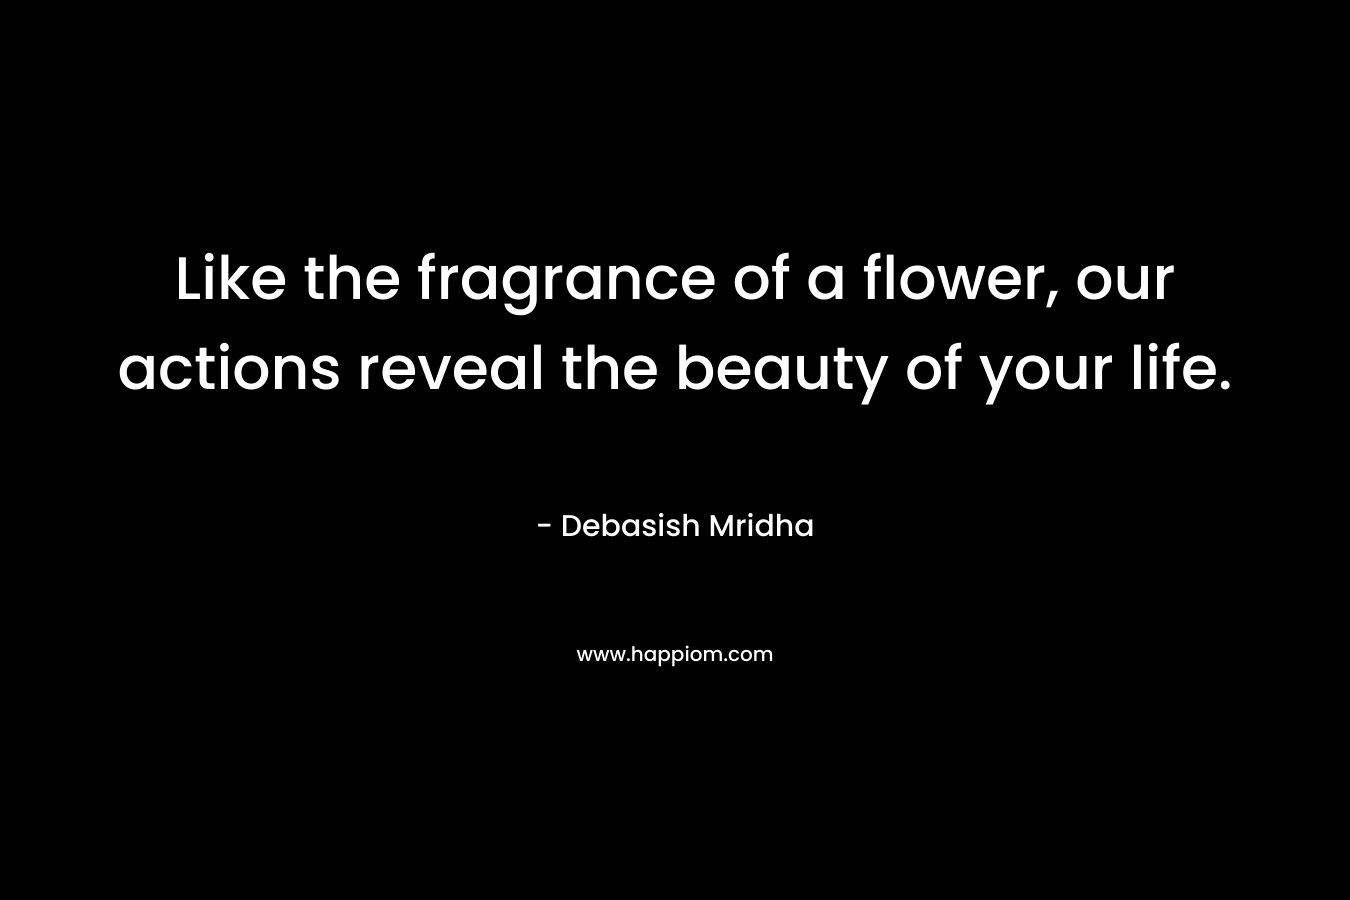 Like the fragrance of a flower, our actions reveal the beauty of your life. – Debasish Mridha